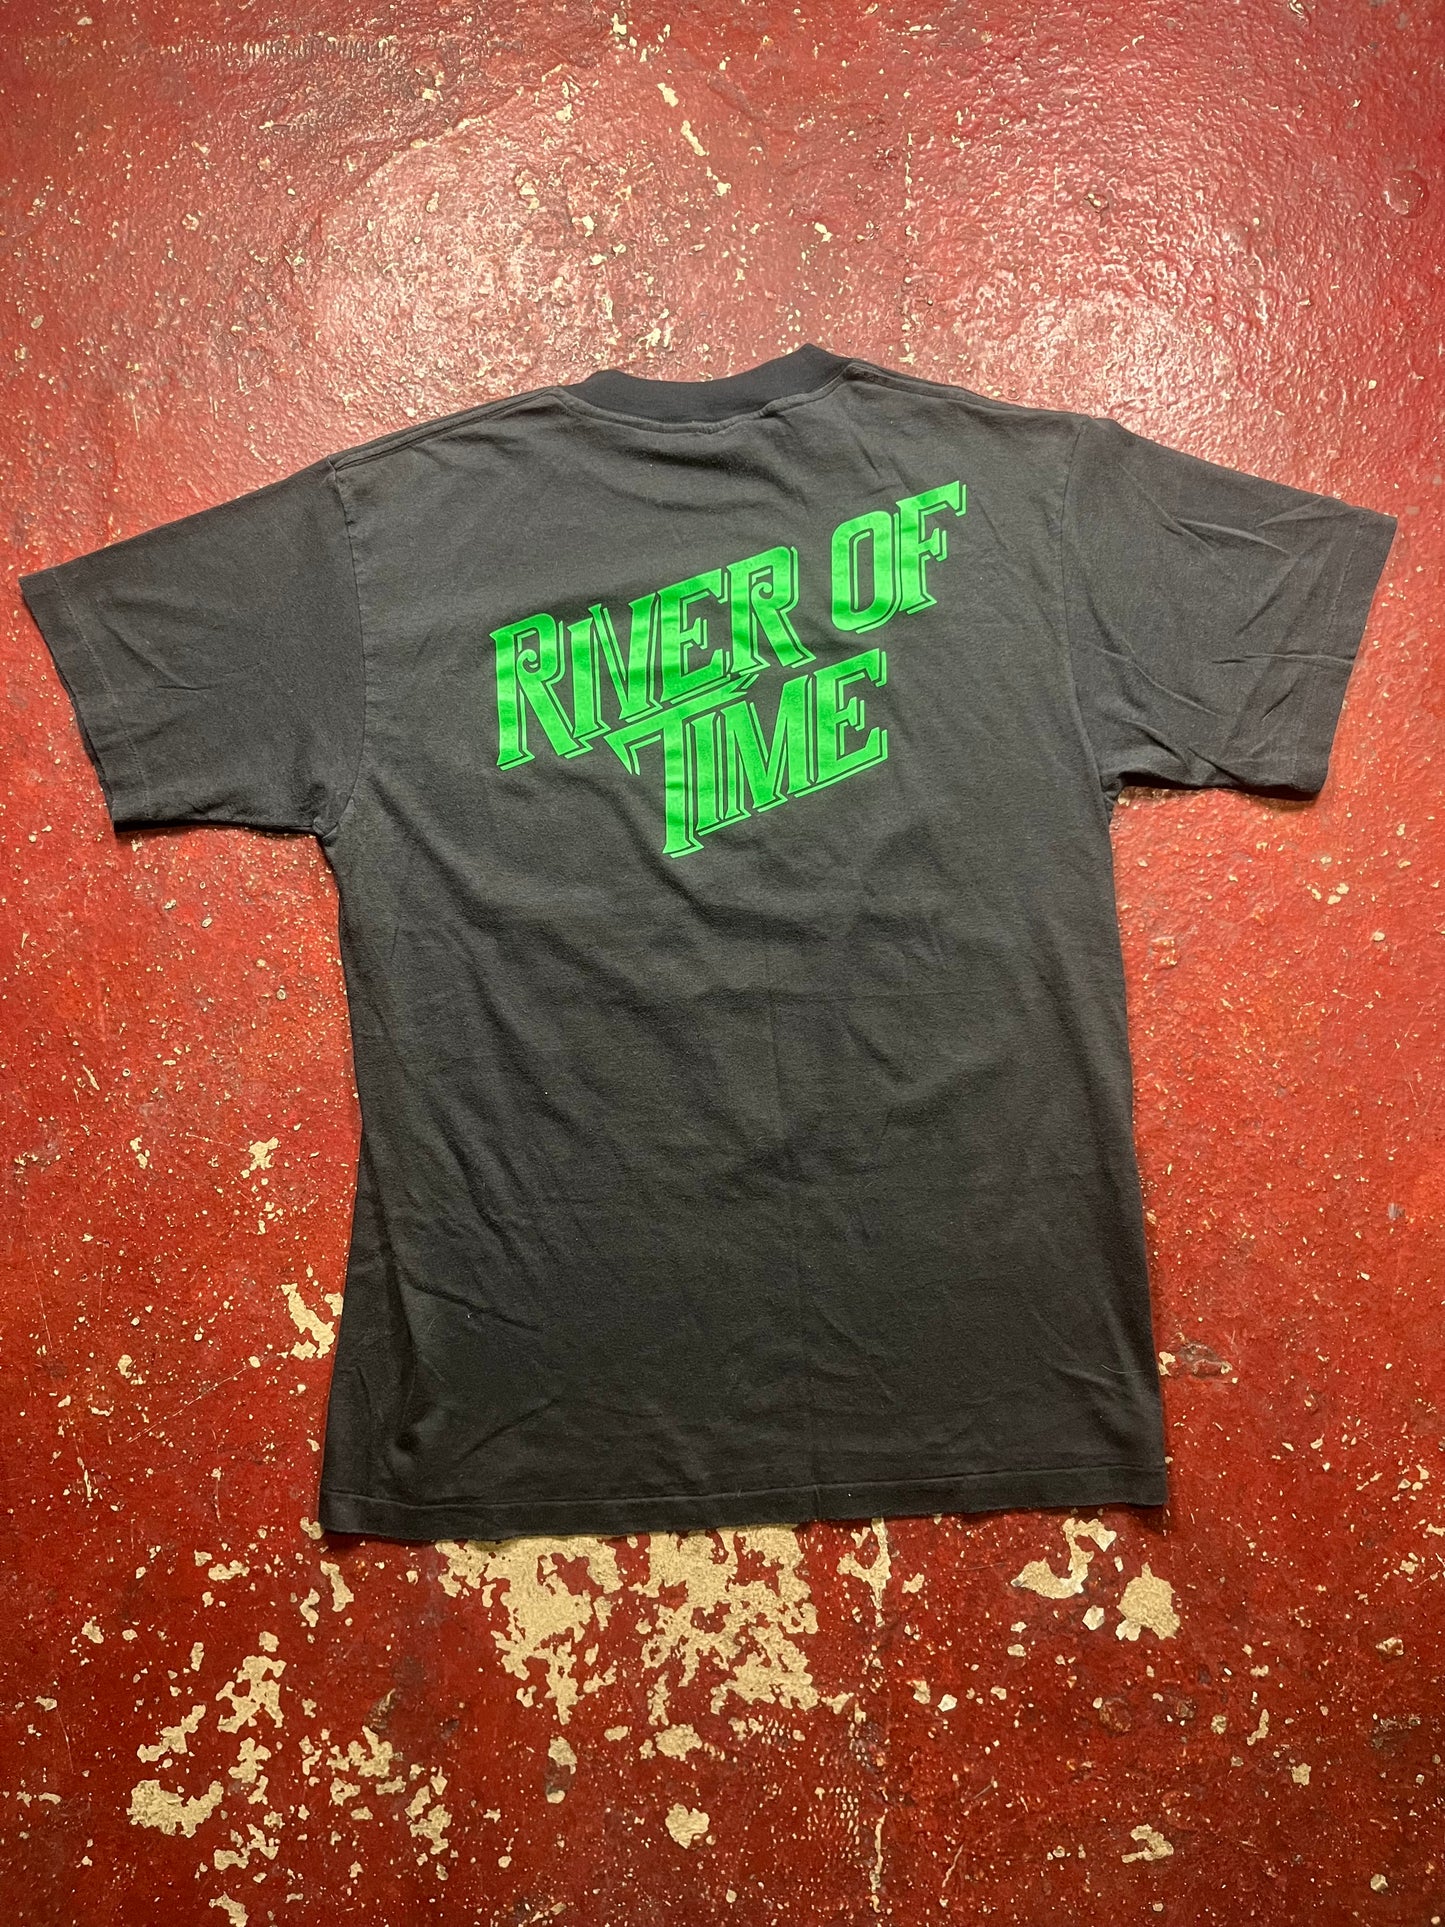 1990 Judds “River Of Time” Tee